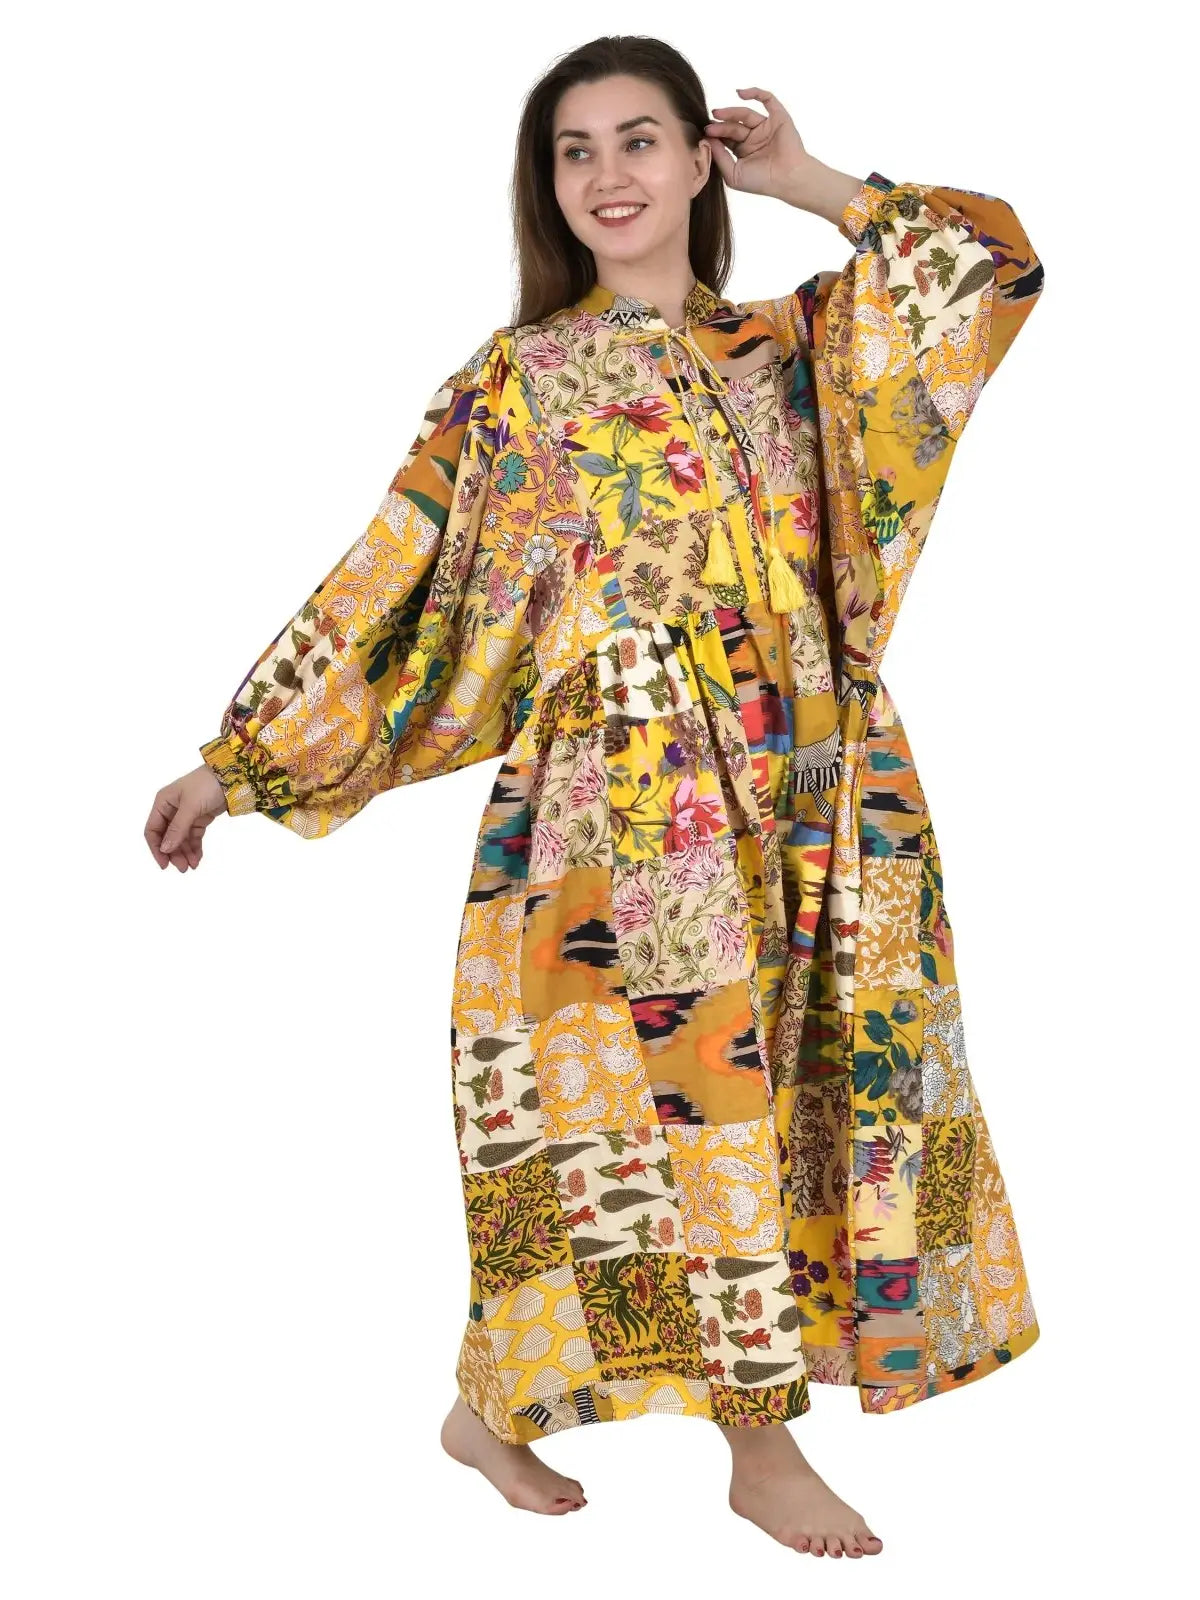 ASSORTED - YELLOW HUES | Hand Stitched Patchwork Cotton Dress | Perfect Anniversary Christmas Gift For Her Sister Mother |